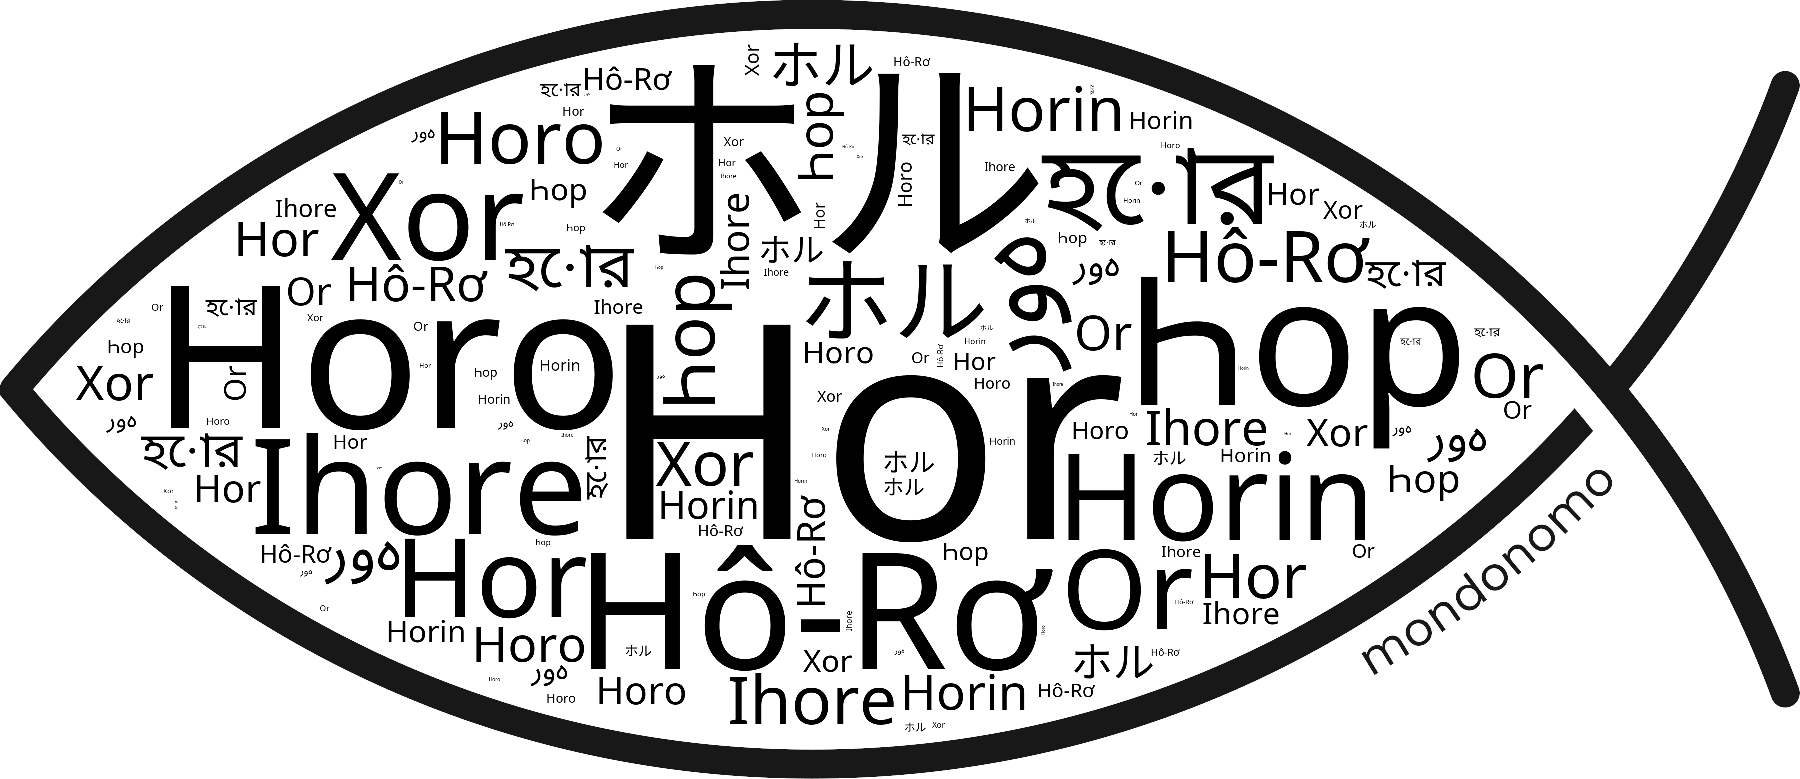 Name Hor in the world's Bibles